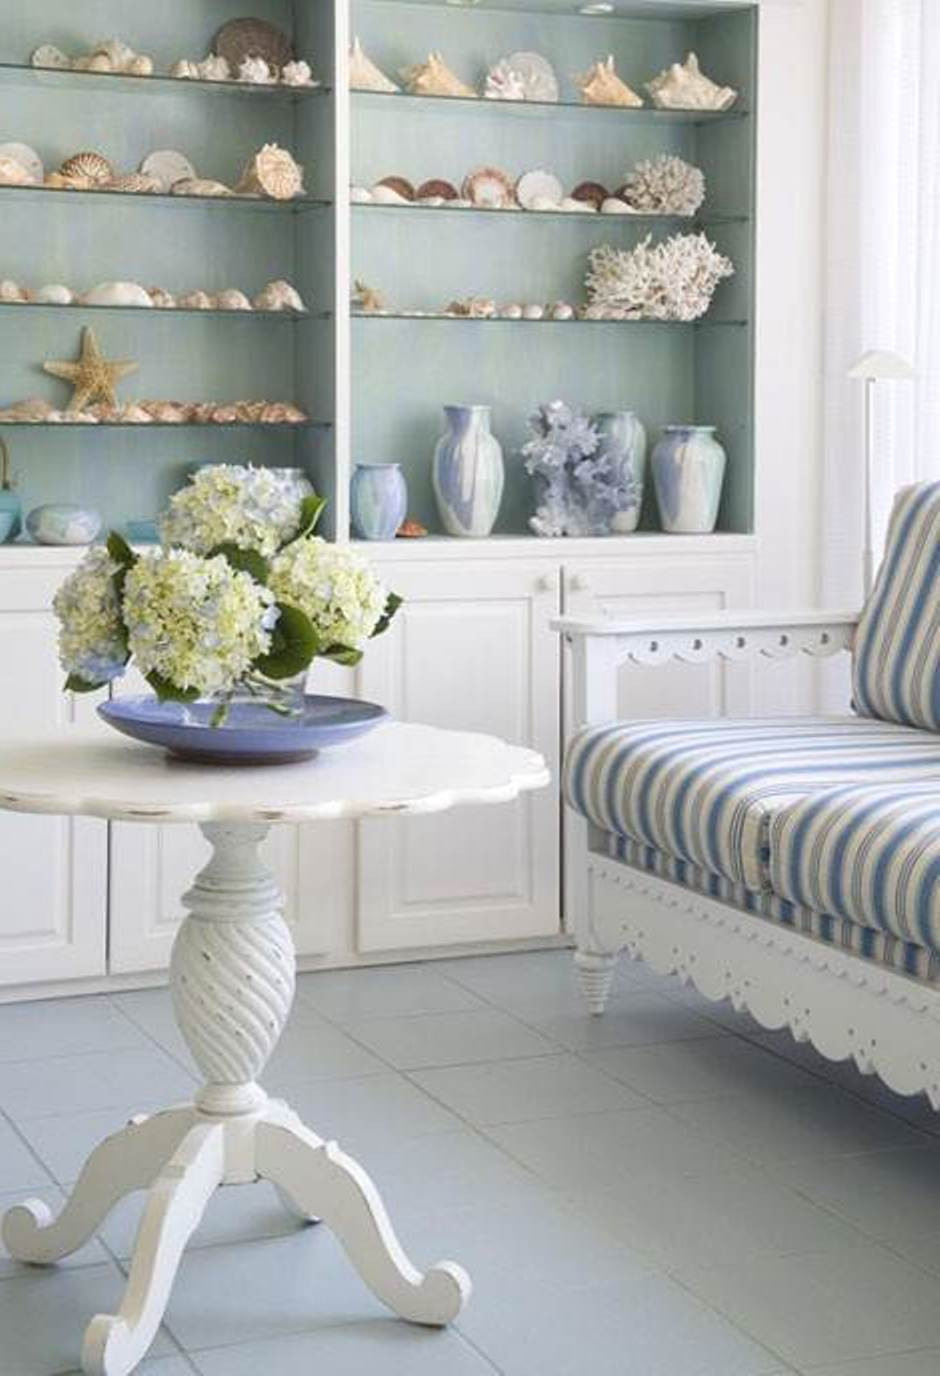 Beach Themed Living Room Ideas
 Bring the Shore Into Home With Beach Style Living Room